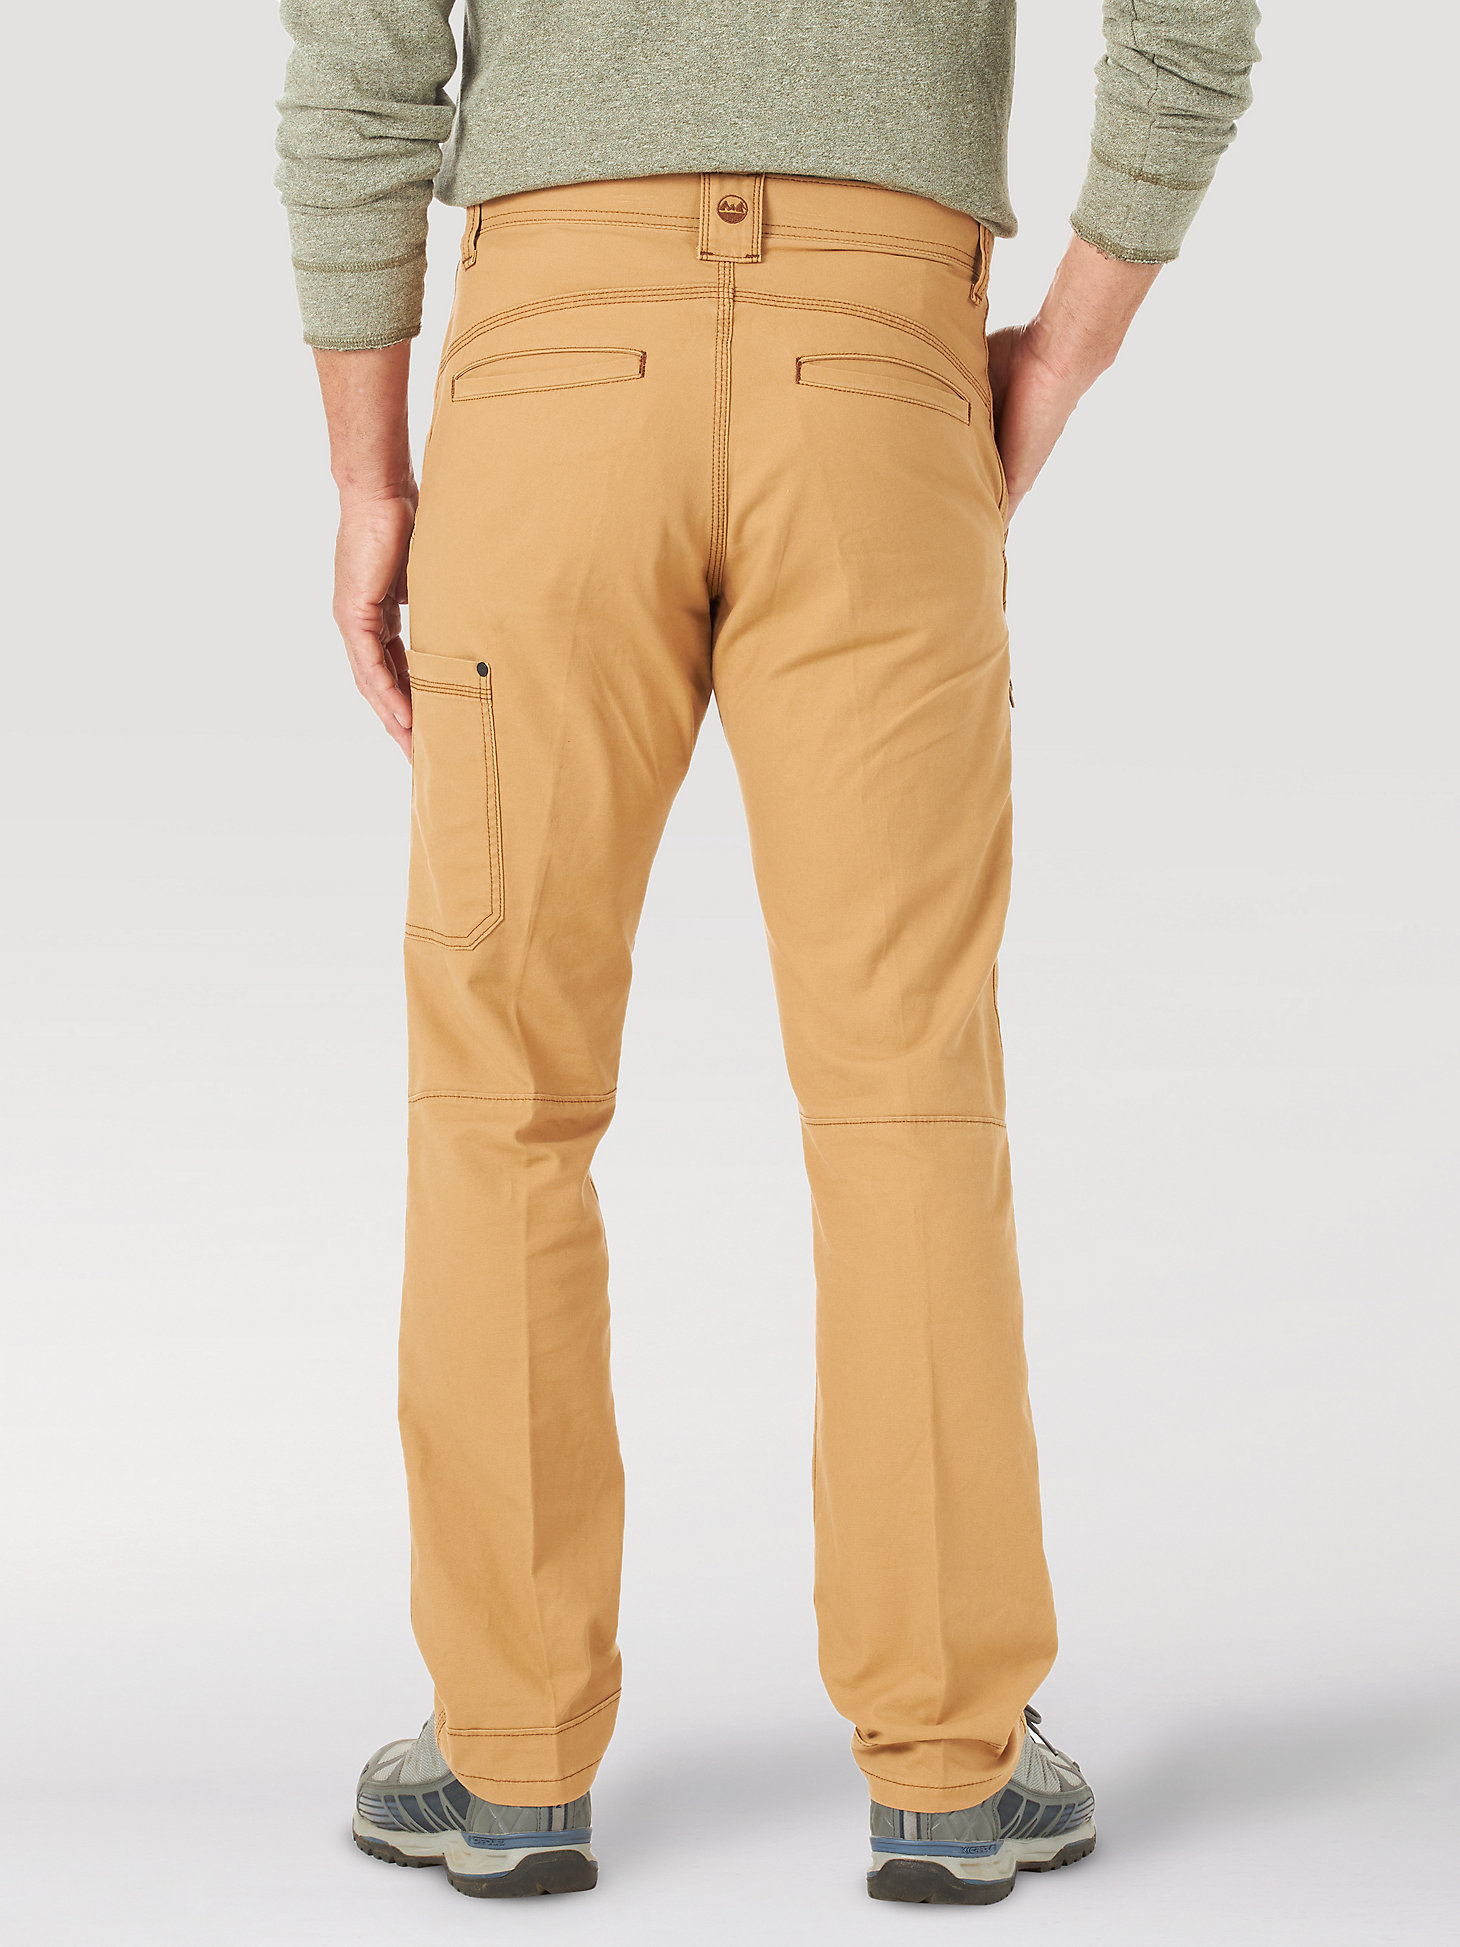 Men's Wrangler® Outdoor Rugged Utility Pant in Bistre alternative view 1